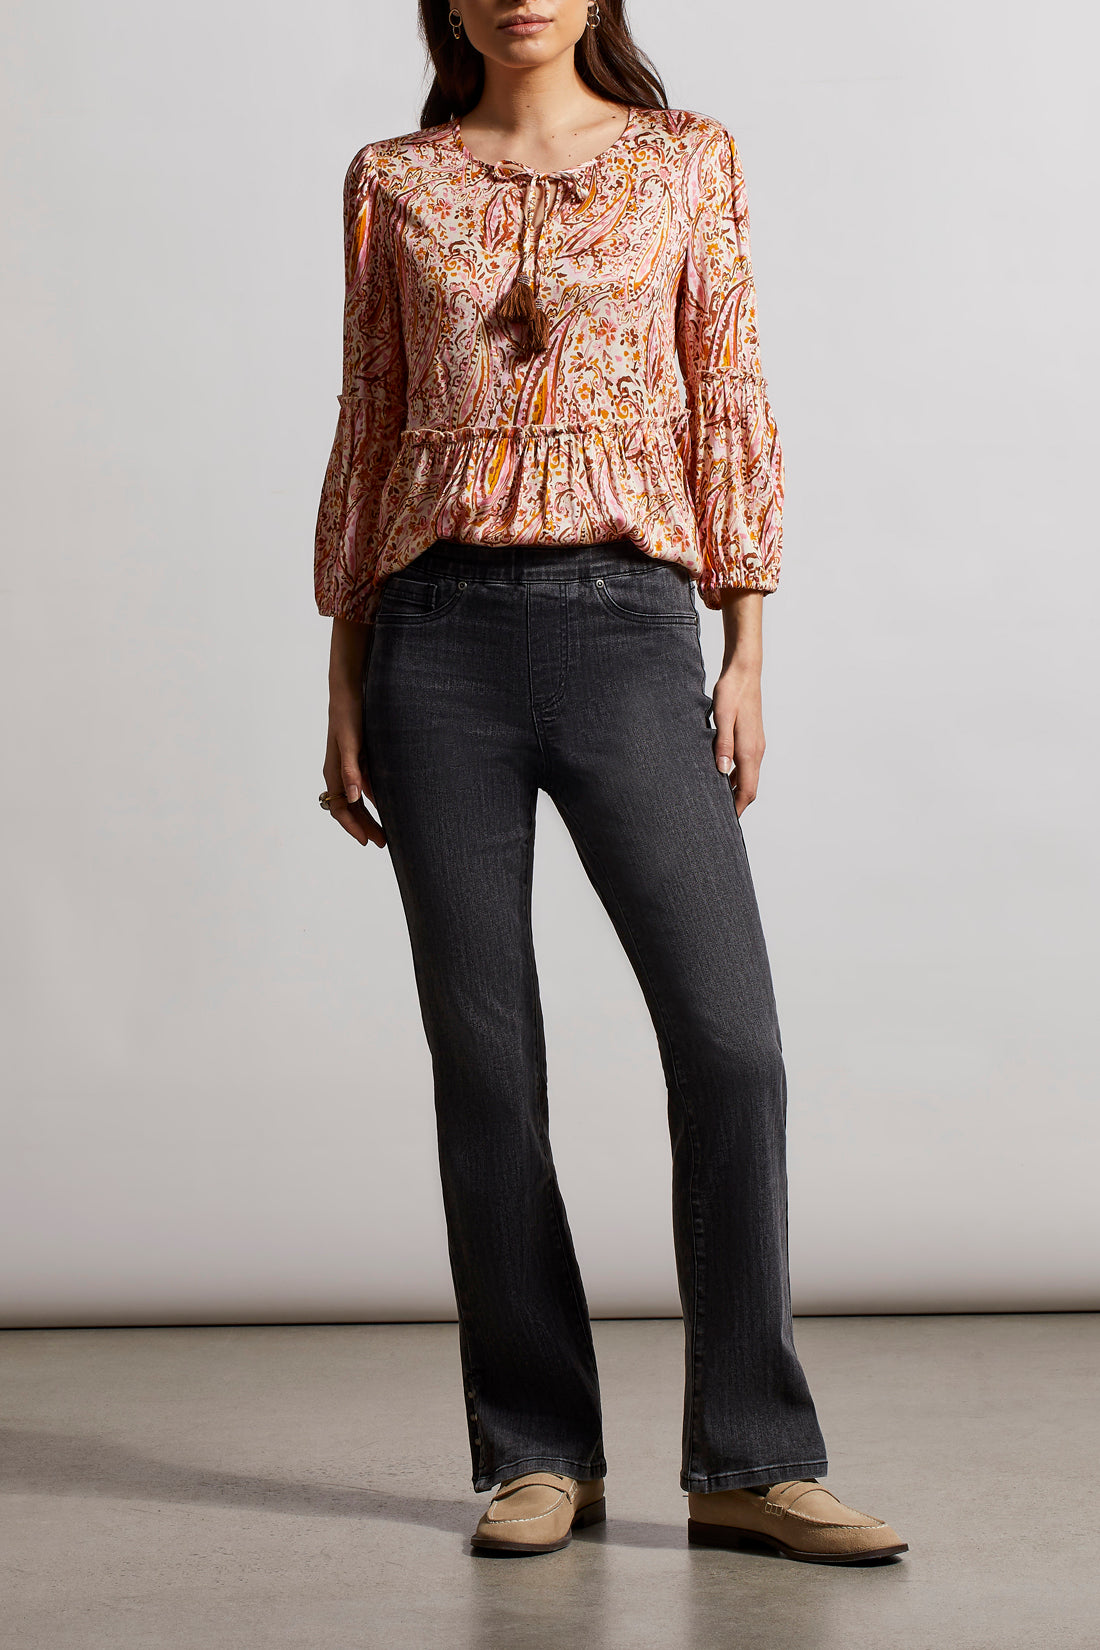 Audrey Pull On Microflare Jeans by Tribal